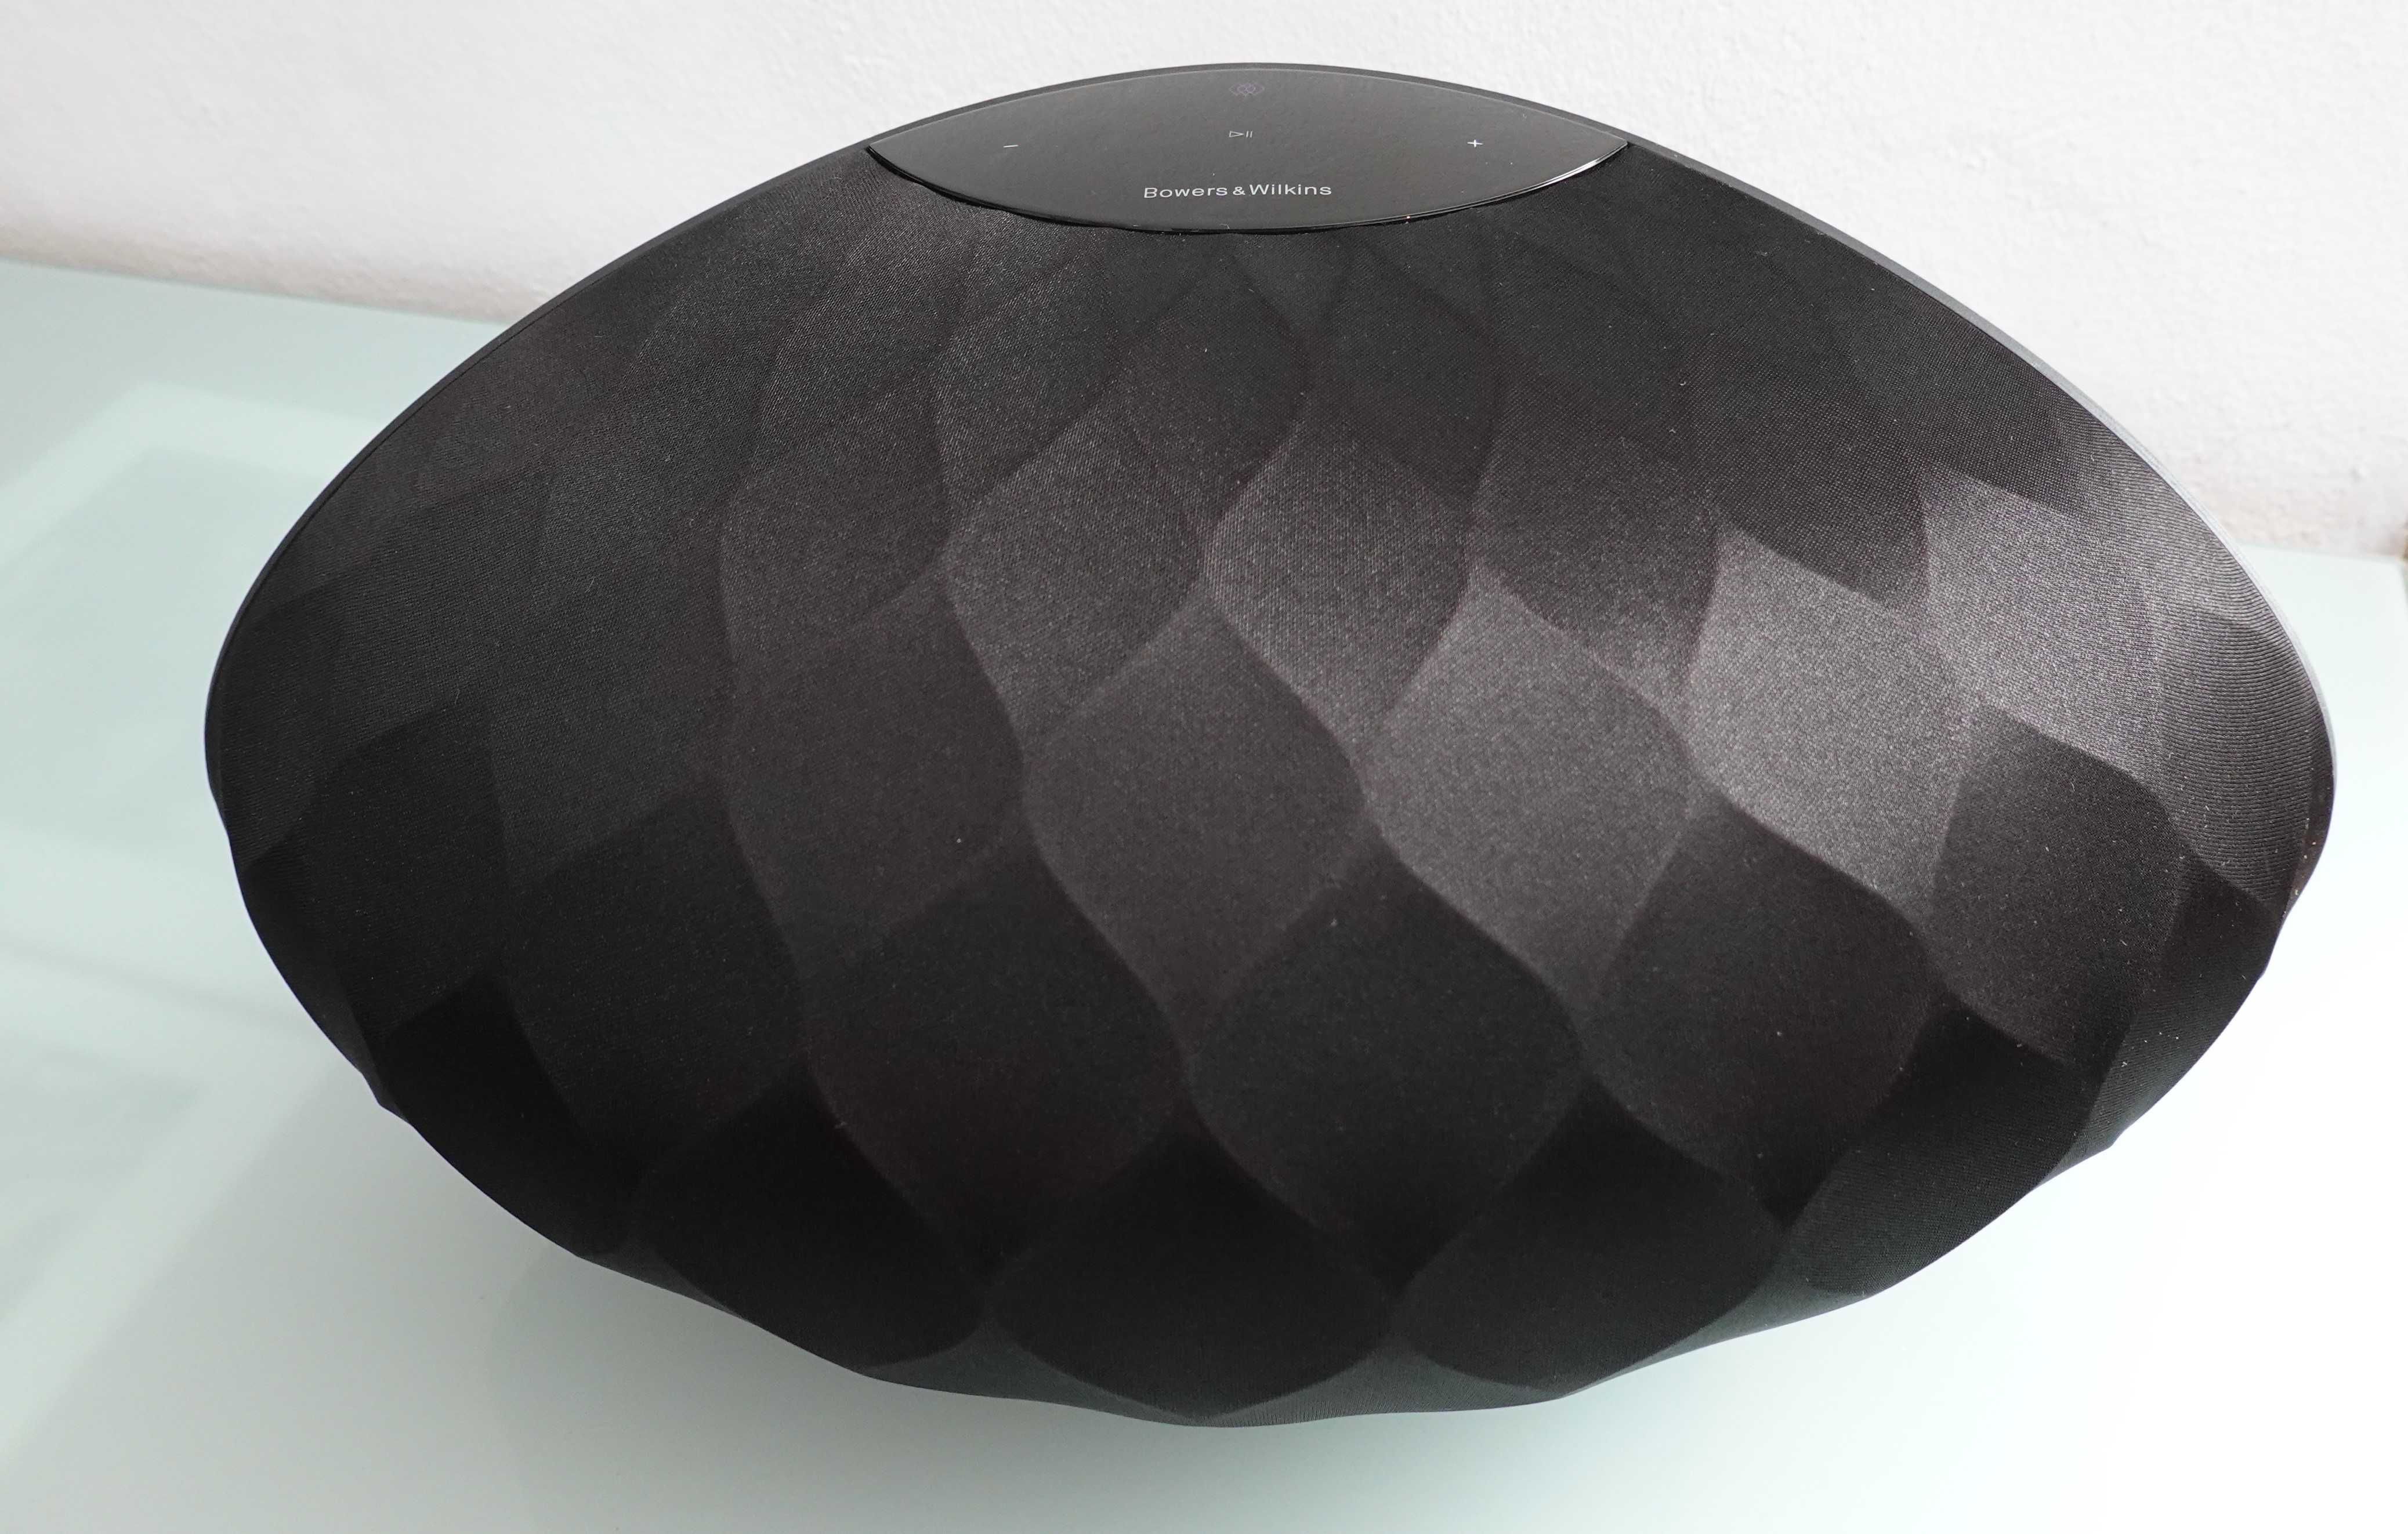 Bowers & wilkins formation wedge.